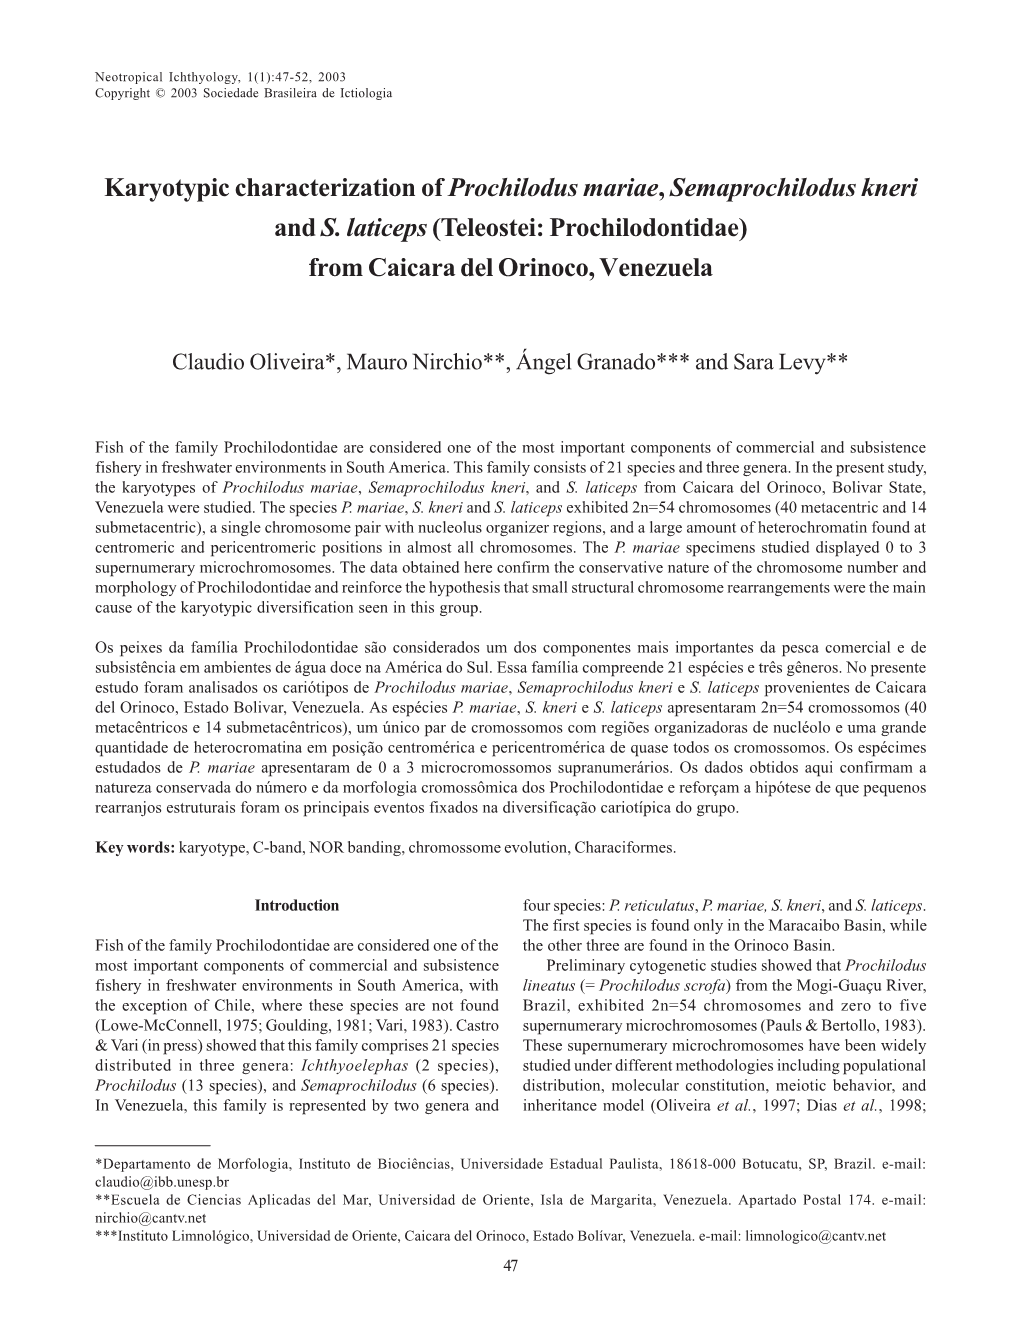 Karyotypic Characterization of Prochilodus Mariae, Semaprochilodus Kneri Ands. Laticeps (Teleostei: Prochilodontidae) from Caica